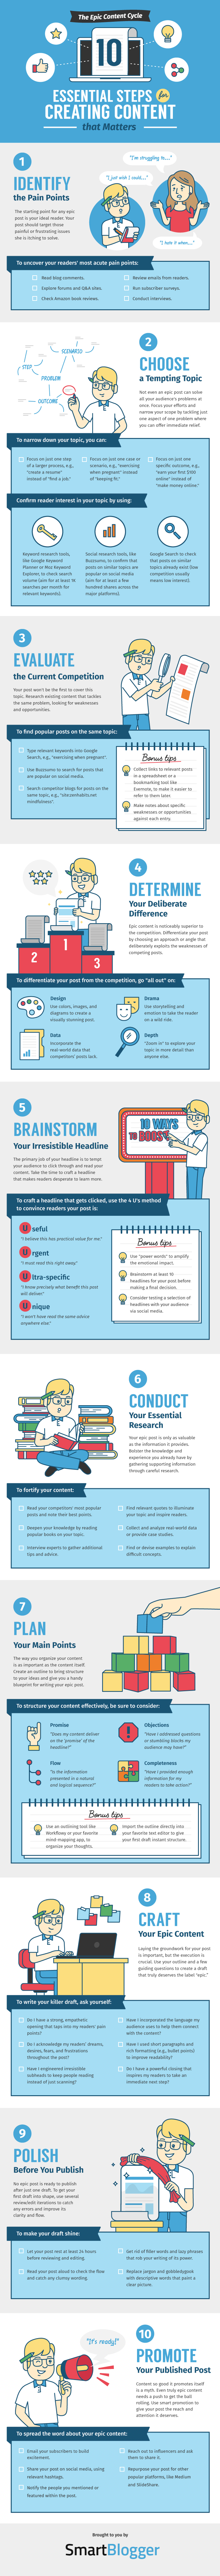 Infographic for 10 Essential Steps for Creating Content